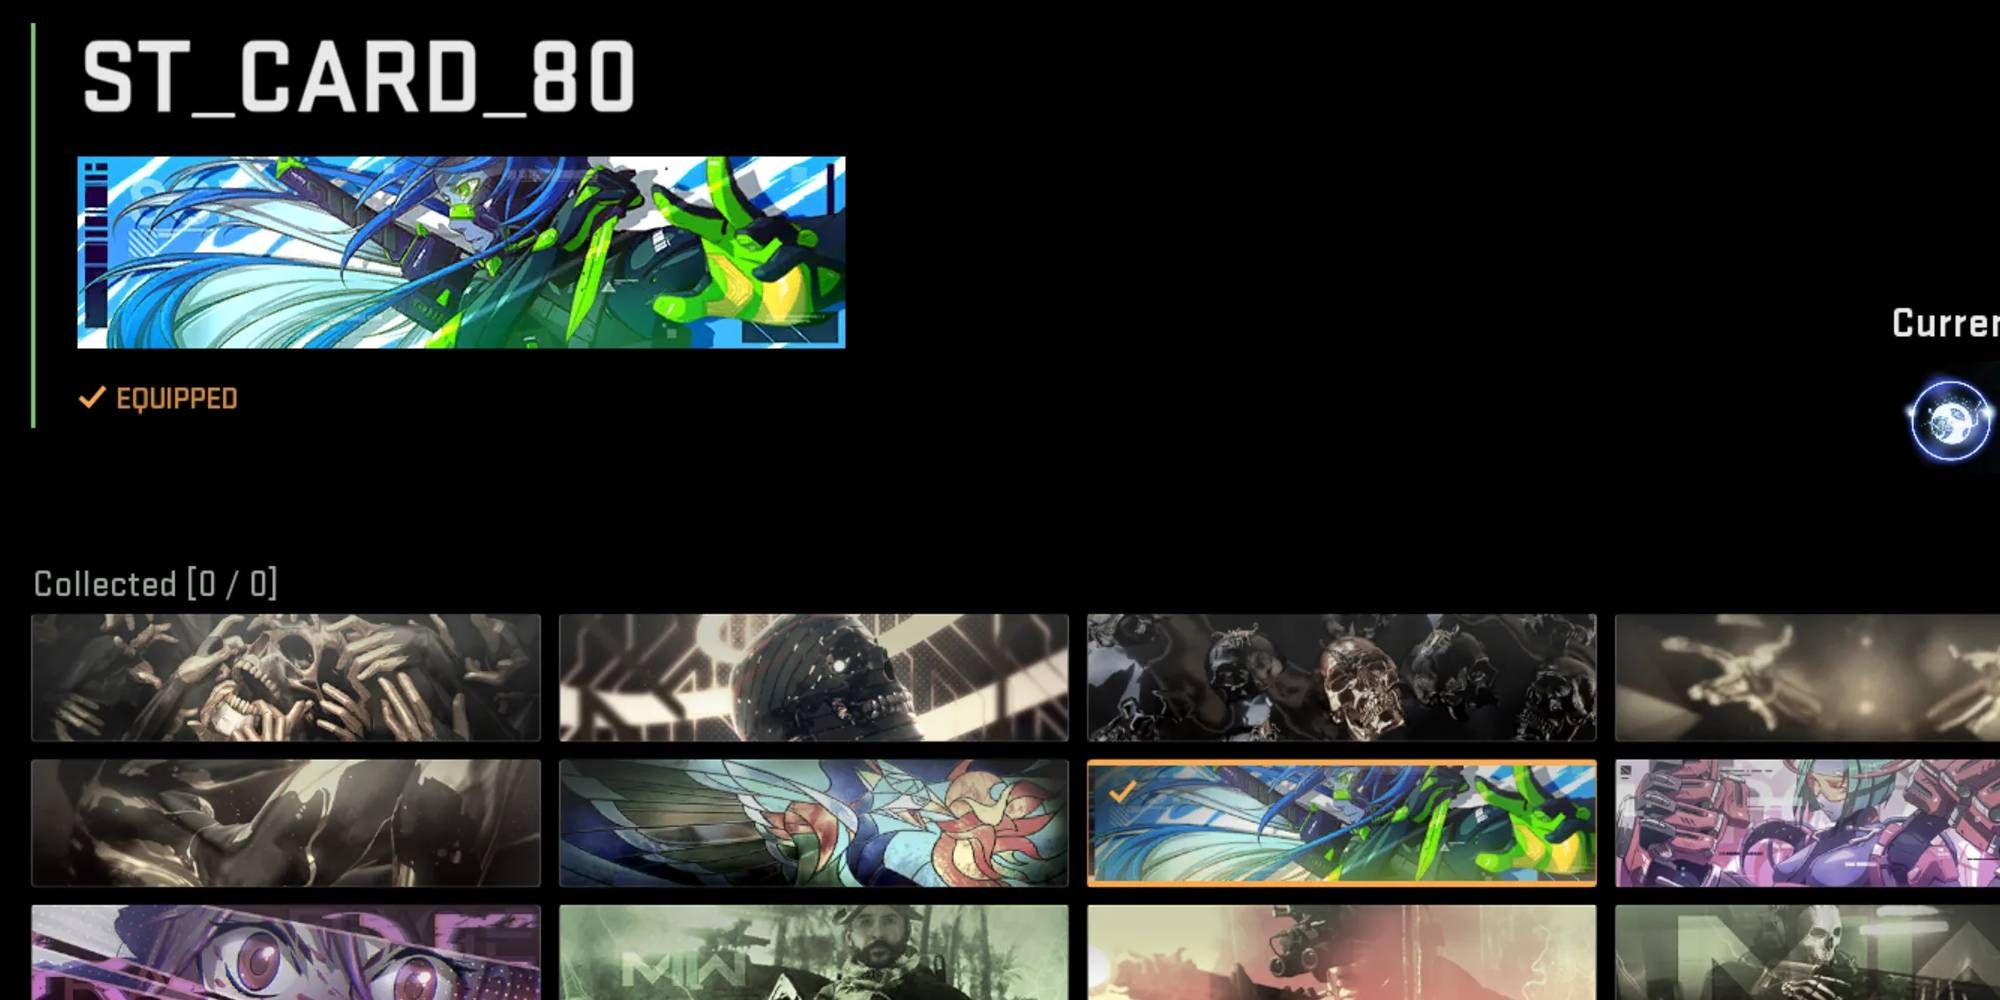 Modern Warfare 2 Calling Cards Menu From Player's Collection Choosing St_Card_80